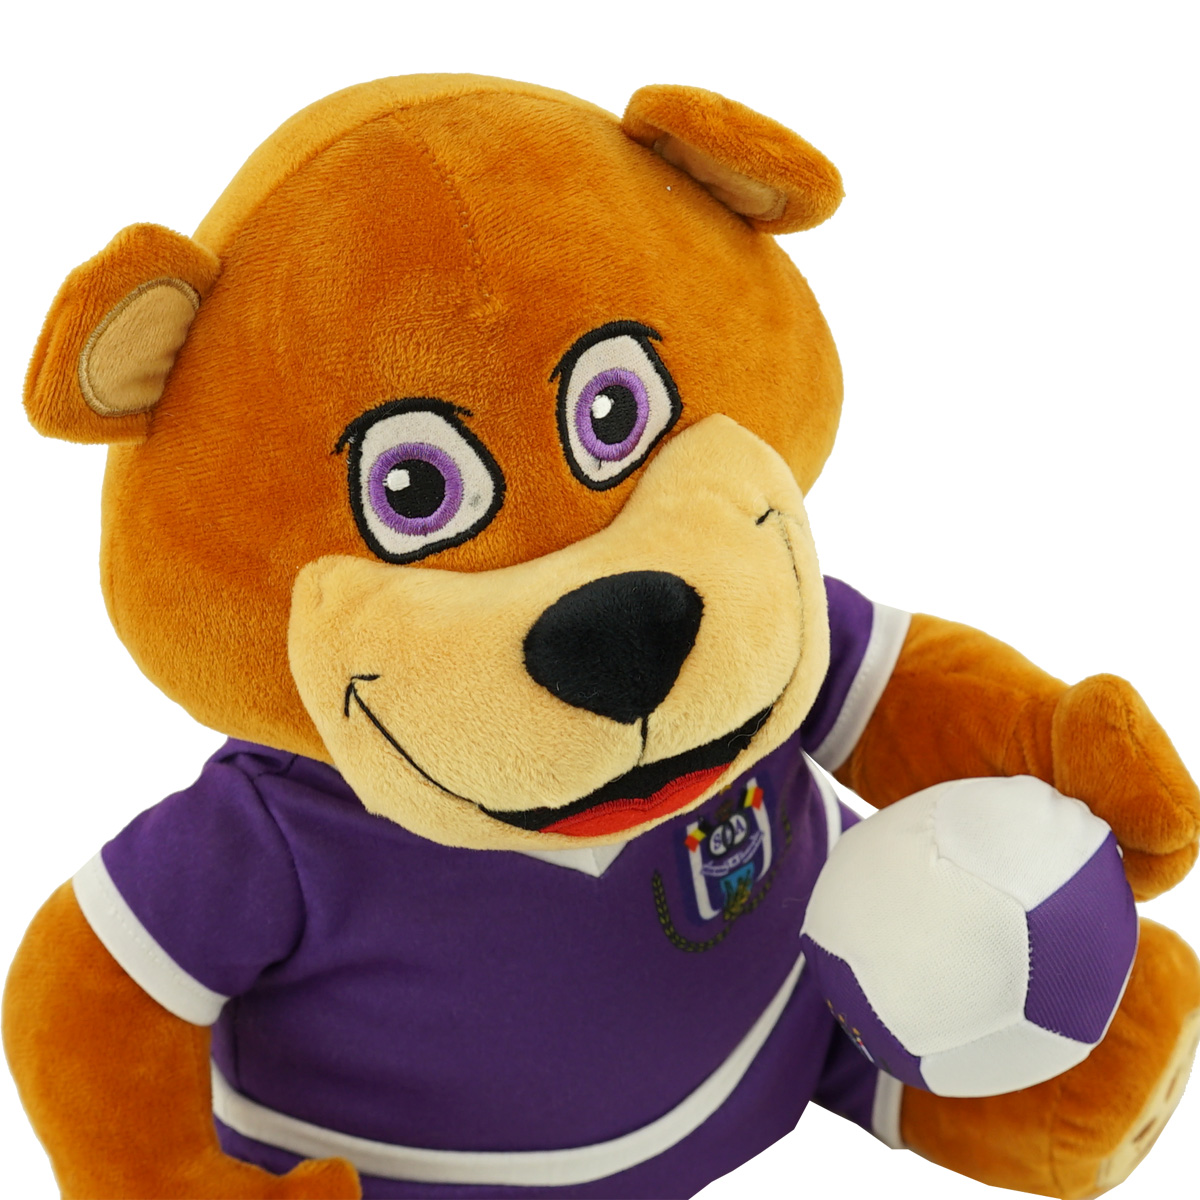 RSCA Ours En Peluche is-hover